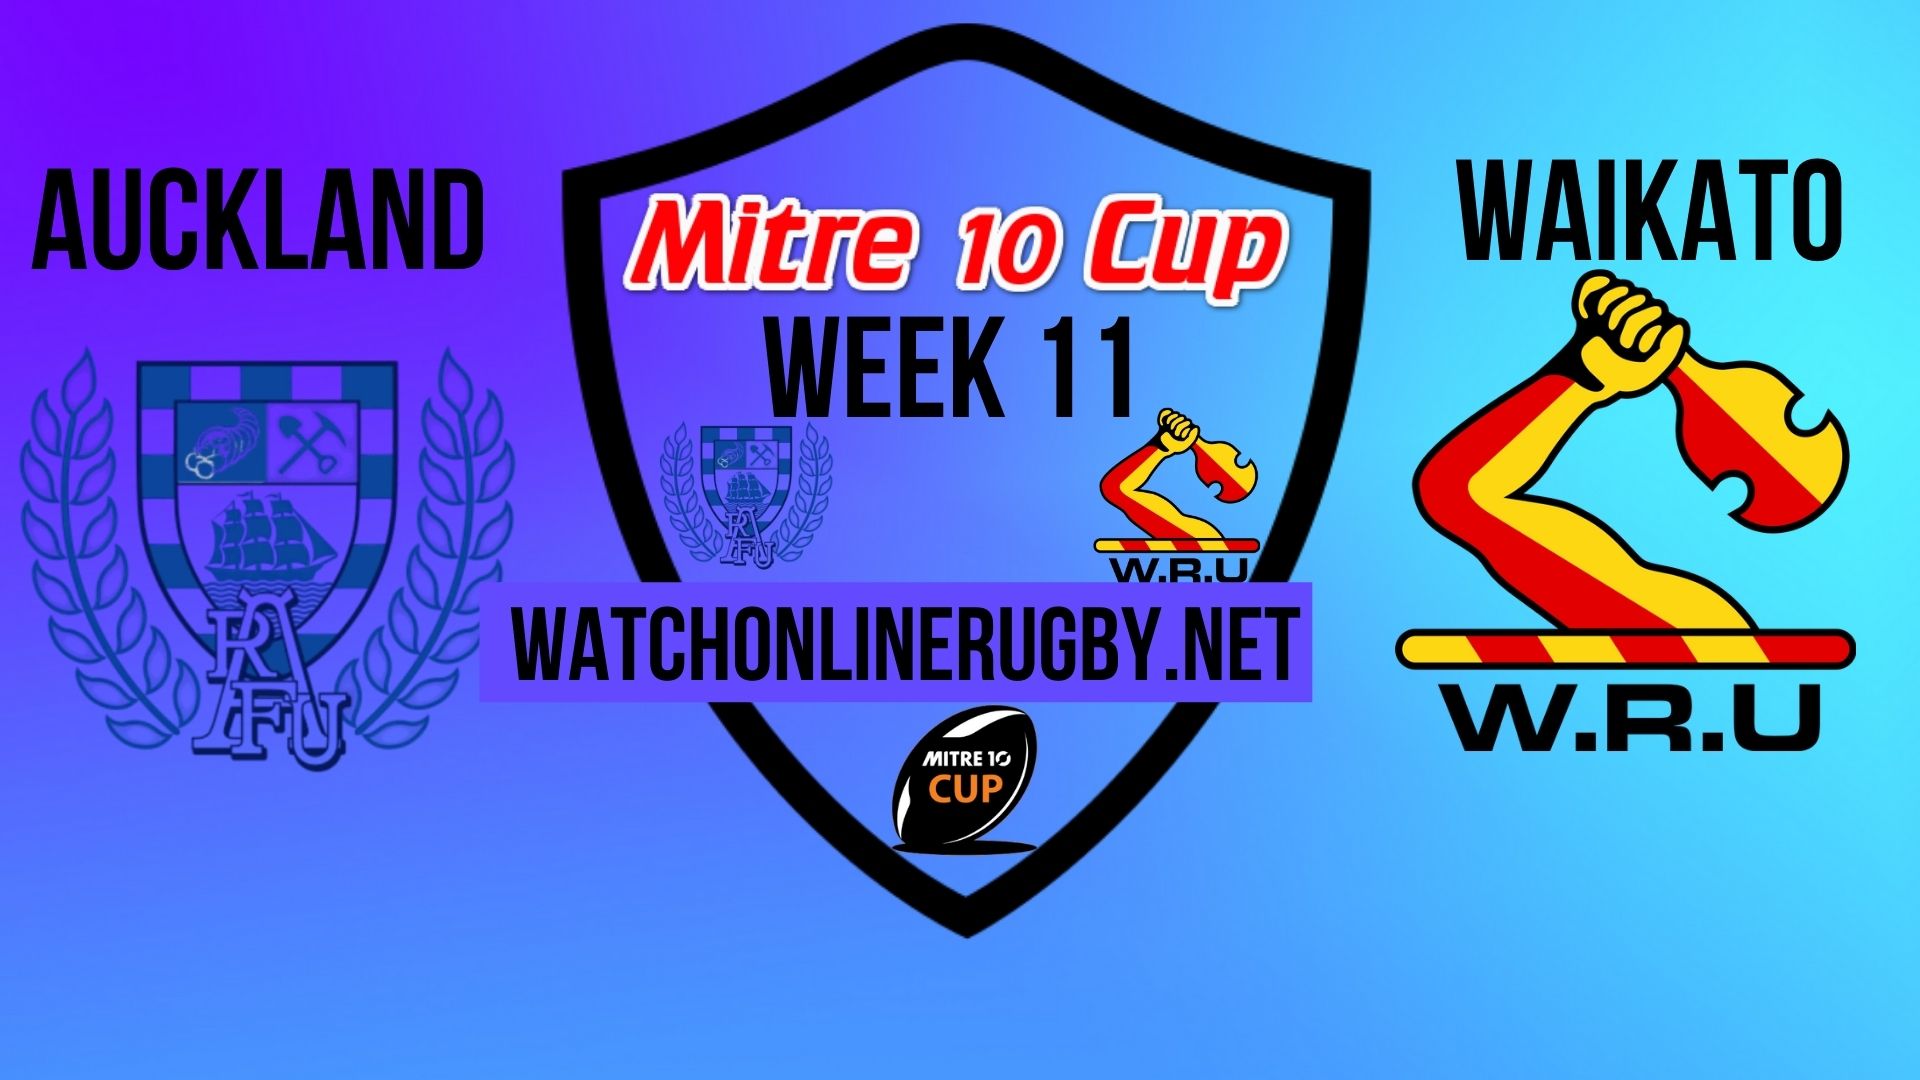 Auckland Vs Waikato Mitre 10 Cup 2020 Week 11